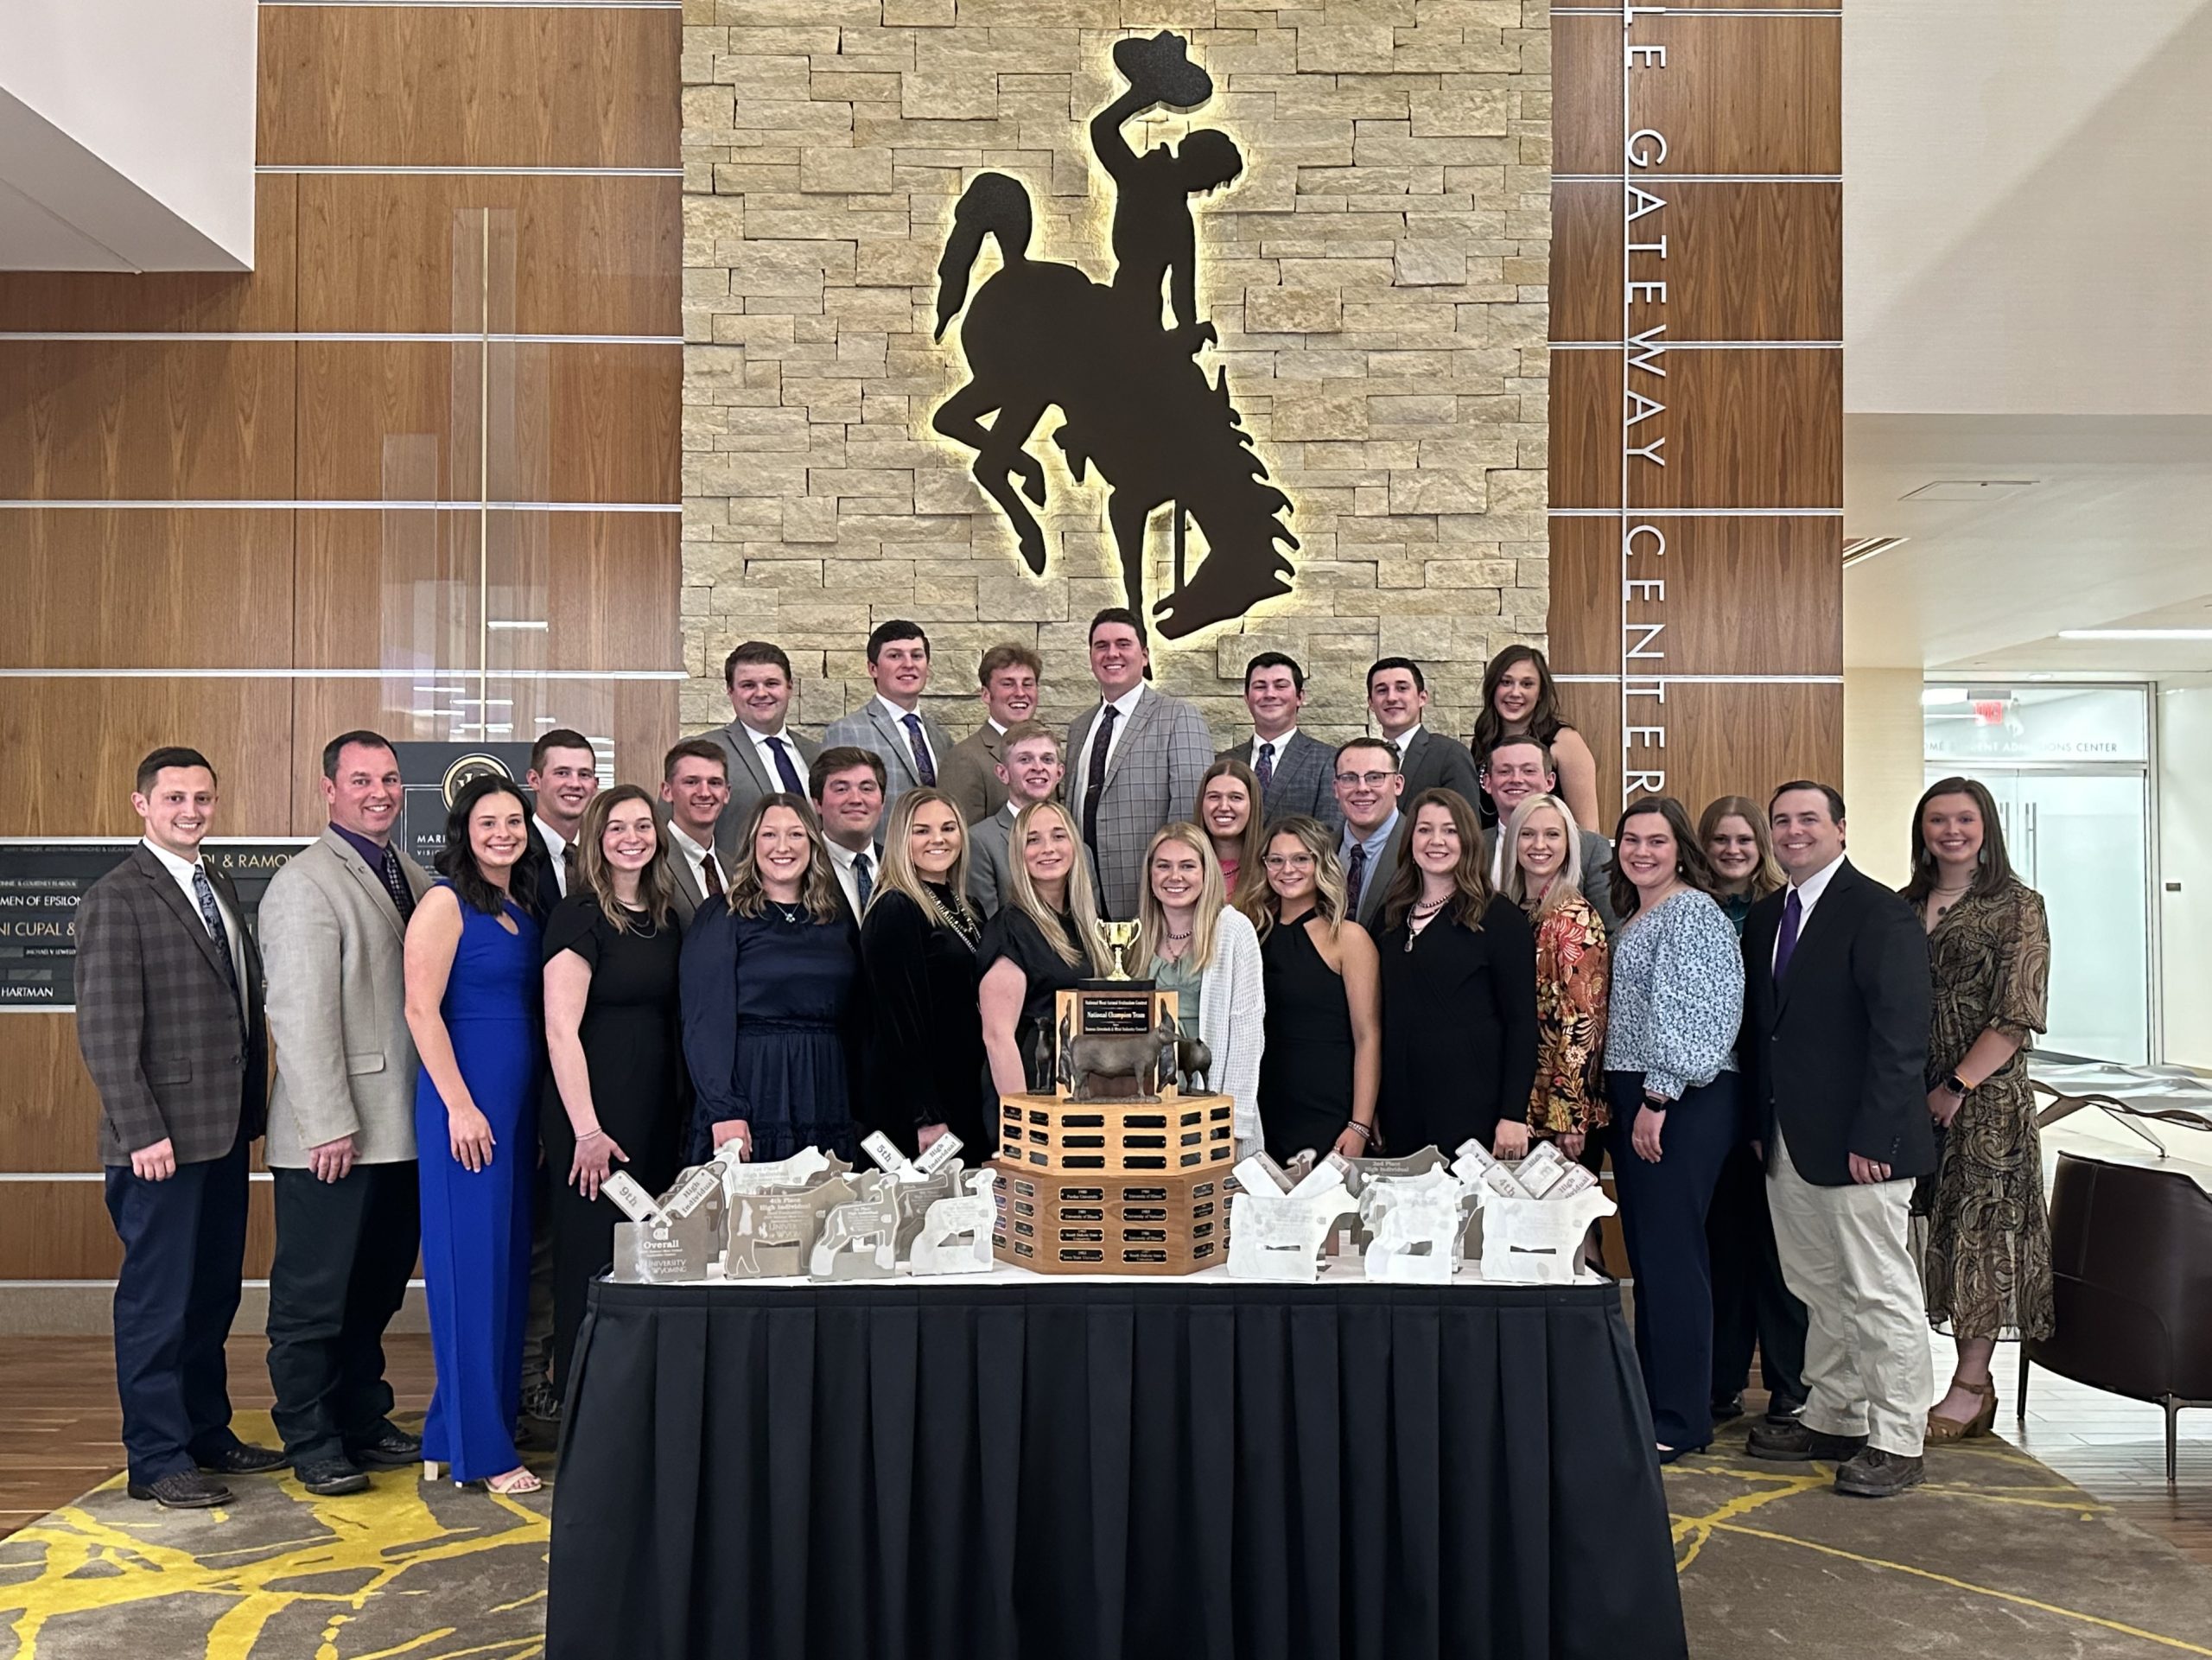 Members of the national champion meat animal evaluation team from Kansas State University are from left (back row) Benjamin Archer, Ty Knodle, Chanse Mullinix, Ethan Hyers, Sam Stickley, Cole Murphy and Kyla Mennen; (middle row) Blake Bruns, Logan Topp, Logan Buhrman, Hayden Deno, Ava Perrier, Jacob Klaudt, Zane Redifer, Riley Coates and Emerson Tarr; (front row) coaches Payton Dahmer and Chris Mullinix; Sadie Marchiano, Katelyn Wallace, Kylie Schakel, Olivia Gerloff, Quinna Molden, Bailey Lavender, Chevy Vaske, Hailey Gillespie, Sydney Stolee, Lauren Thompson and coach Travis O’Quinn. (Courtesy photo.)